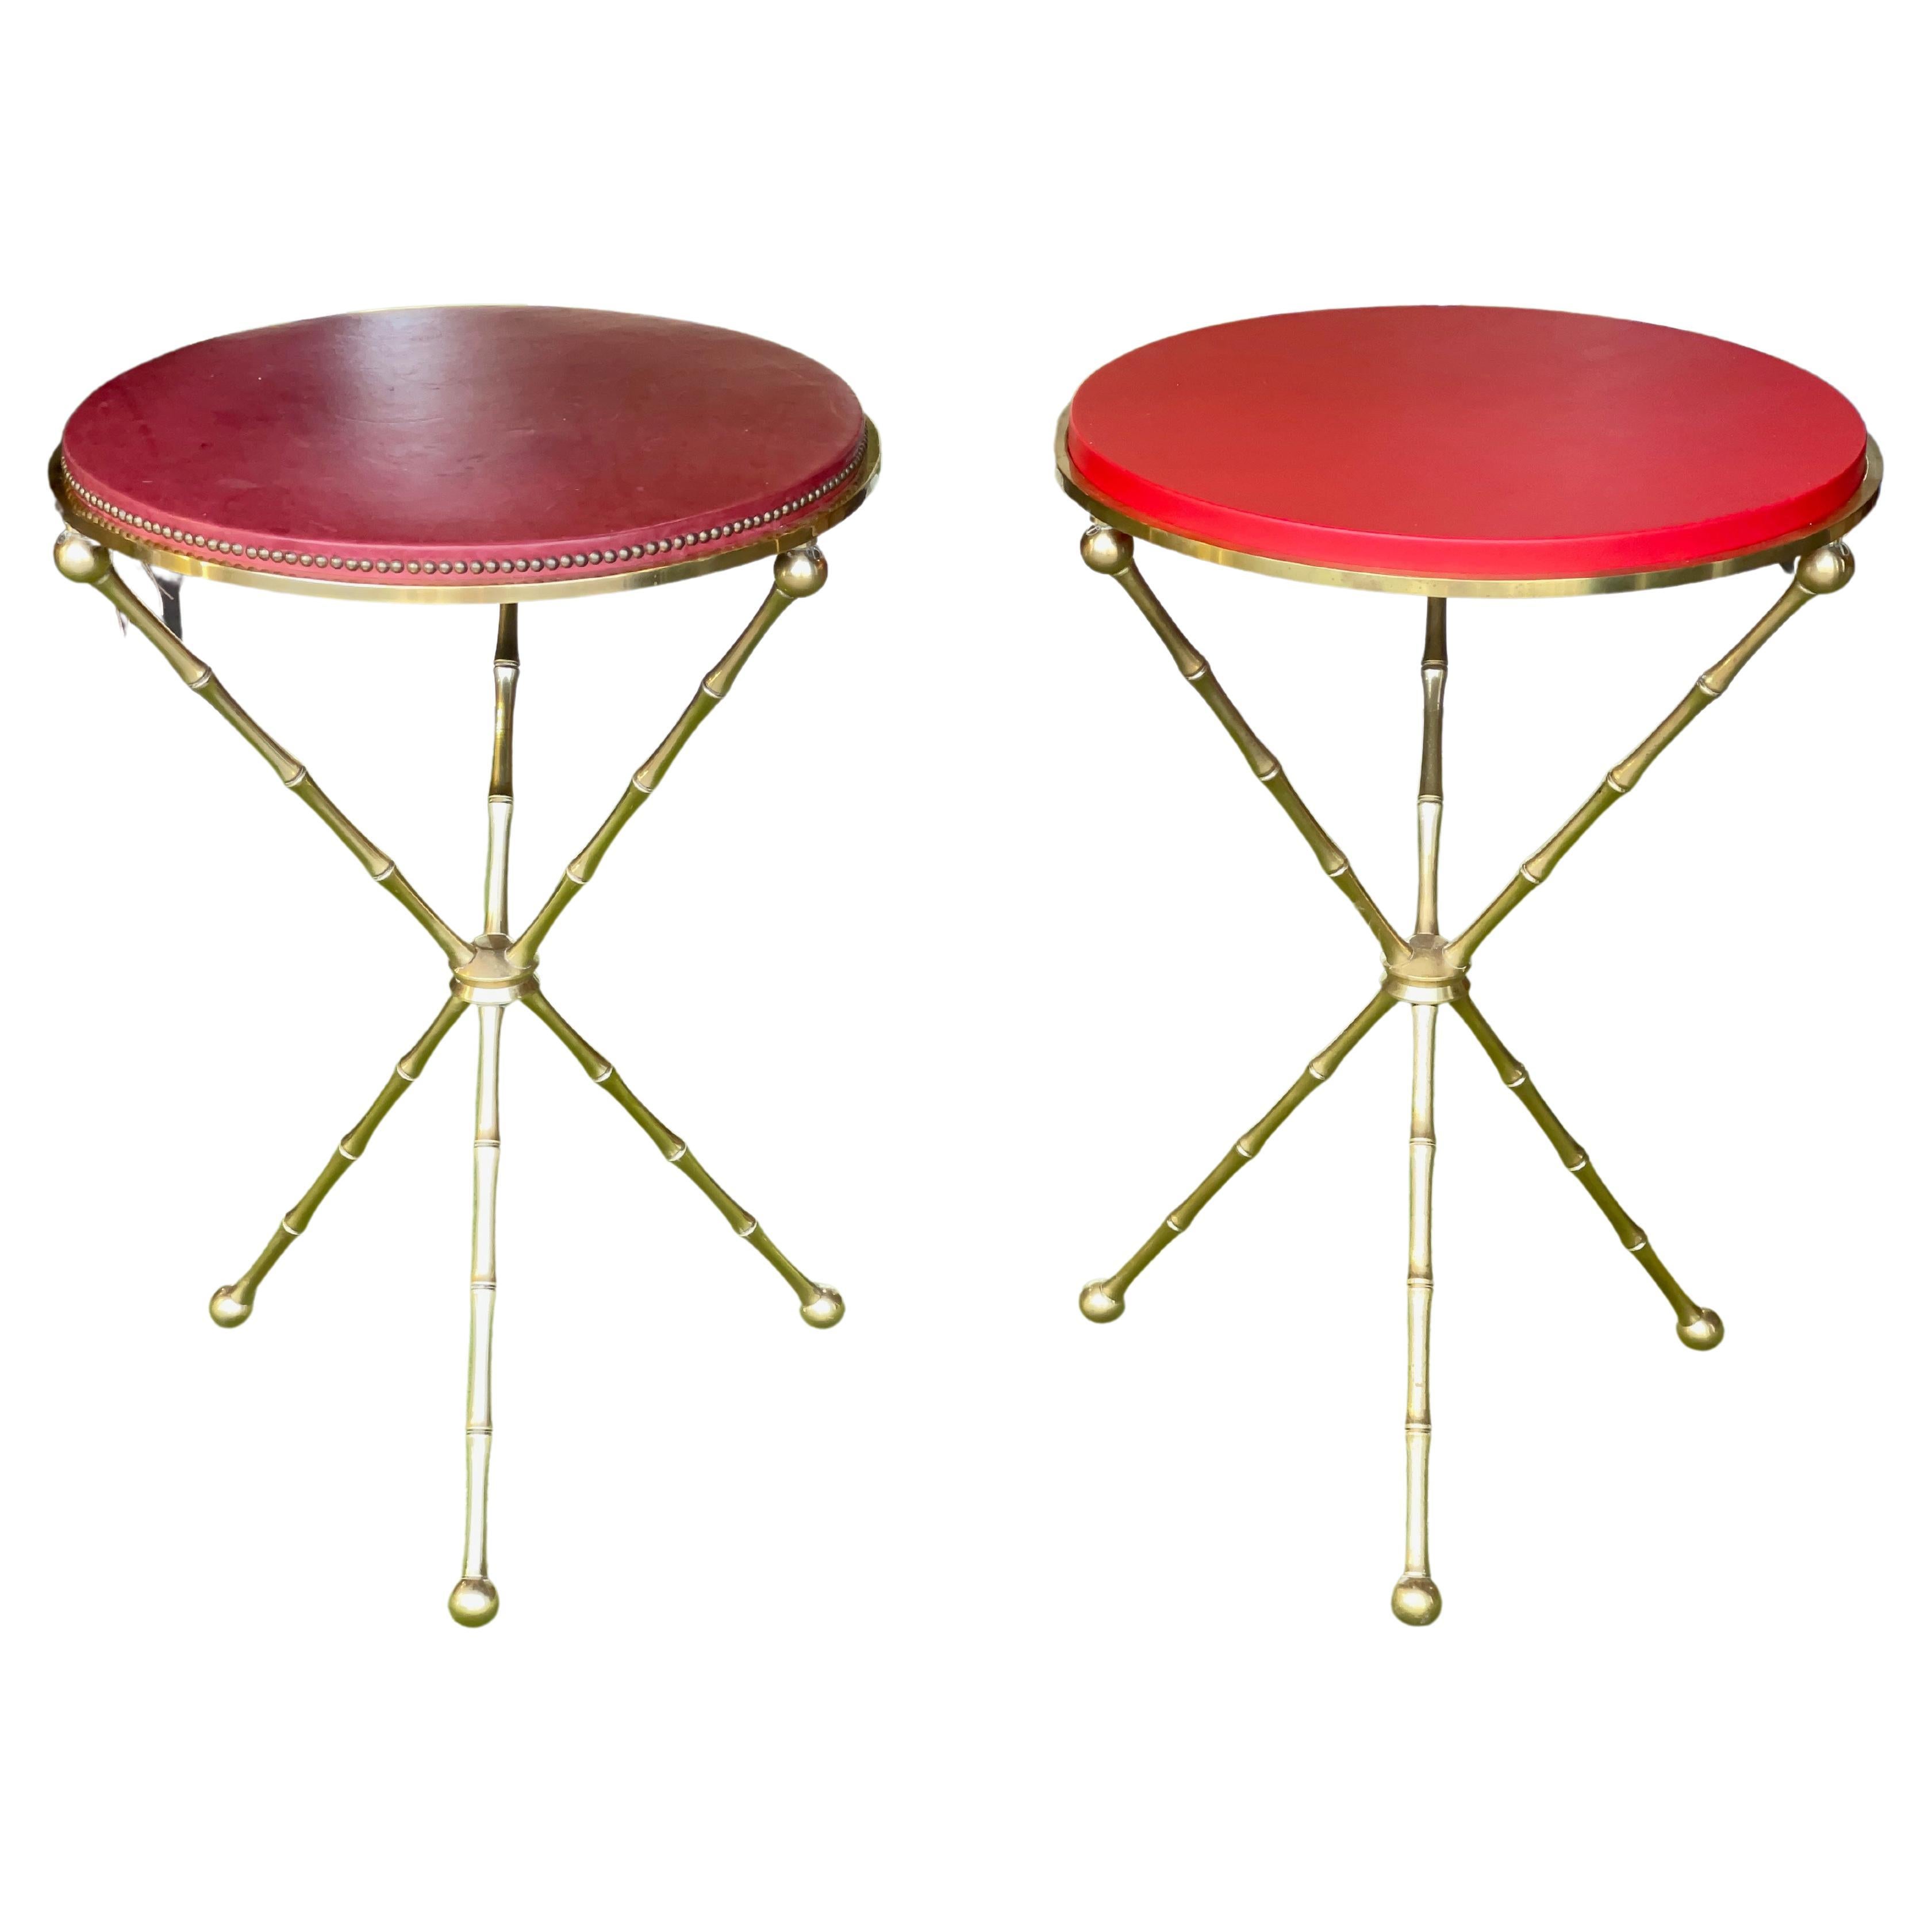 Hollywood Regency Maison Bagues style brass bamboo tripod table For Sale